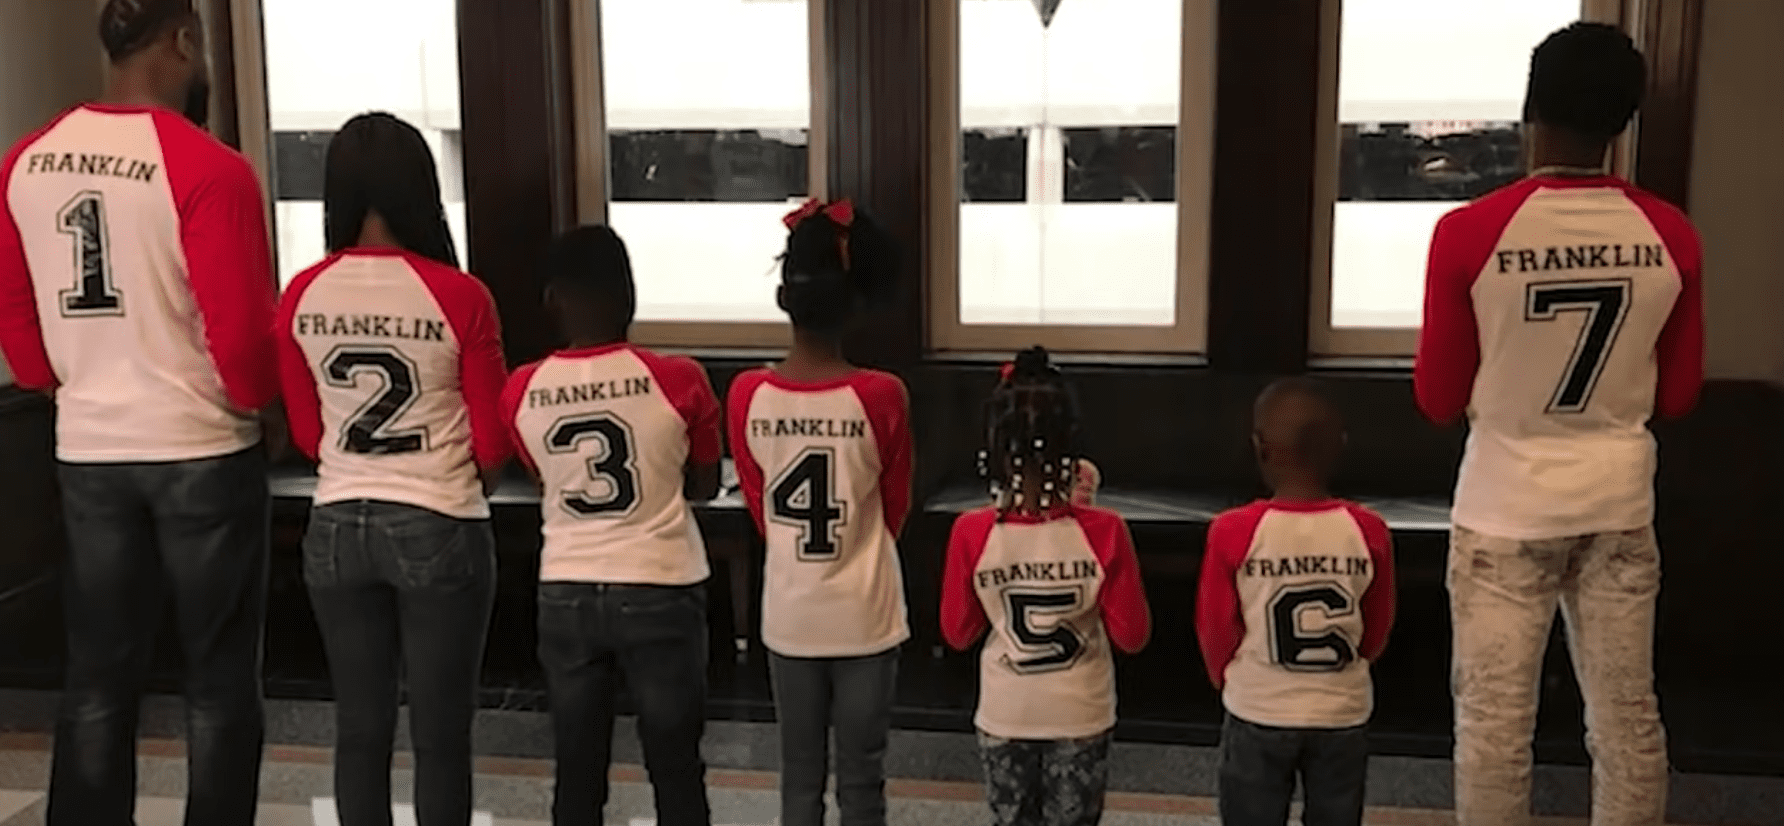 A family wears t-shirts with numbers printed on the back reflecting when they enter the family |  Photo: Youtube / WFAA